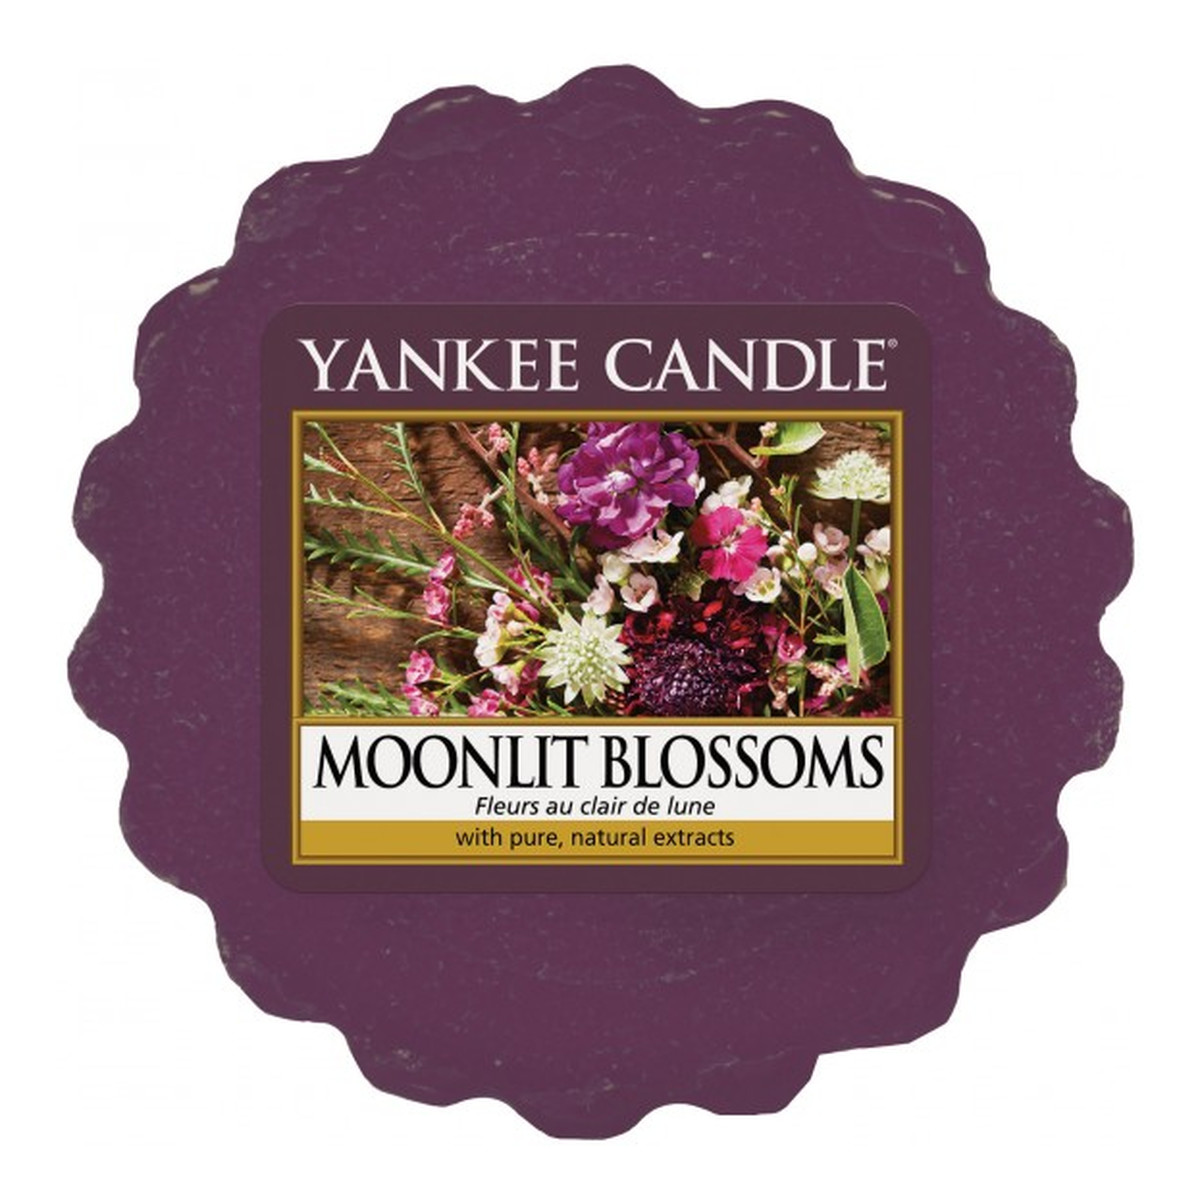 Yankee Candle Wax wosk zapachowy moonlit blossoms 22g